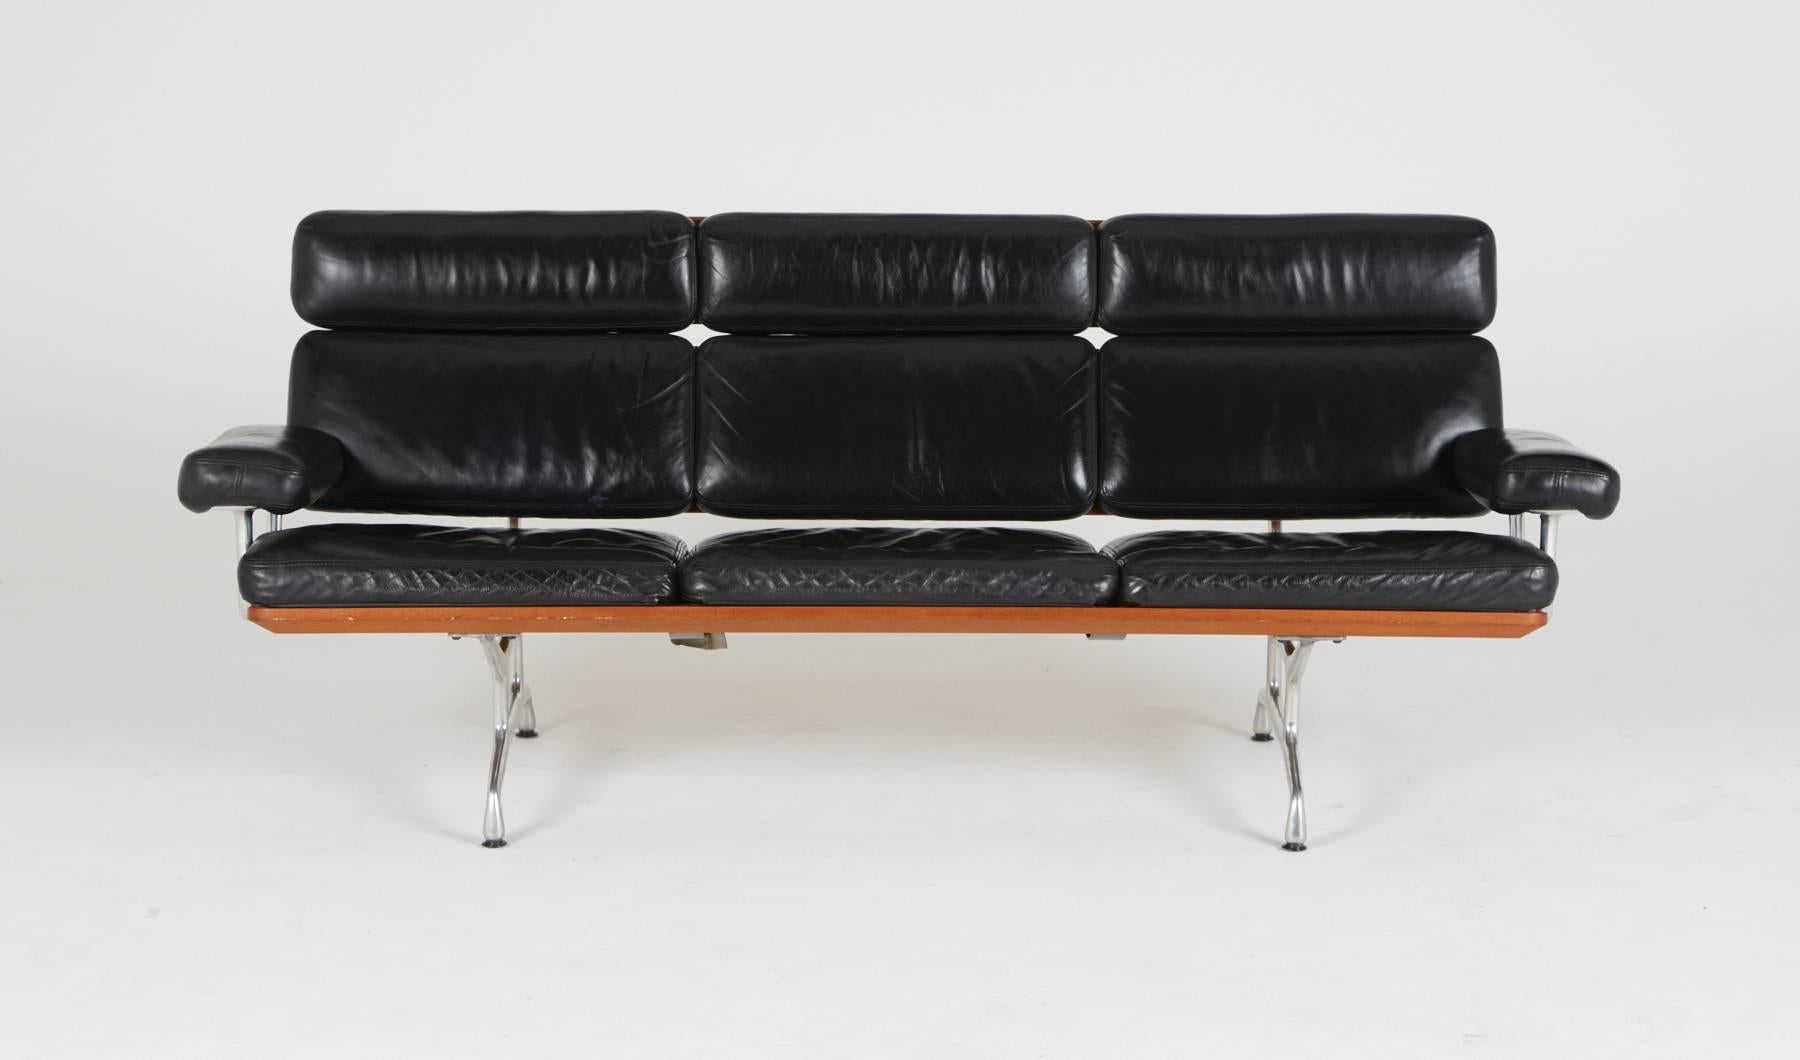 The Eames three-seat sofa, designed 1984, was Ray and Charles Eames's last design before Charles's death. It features two floating teak backrest panels across all three seats, while black leather upholsters the soft pad cushions. On the chrome